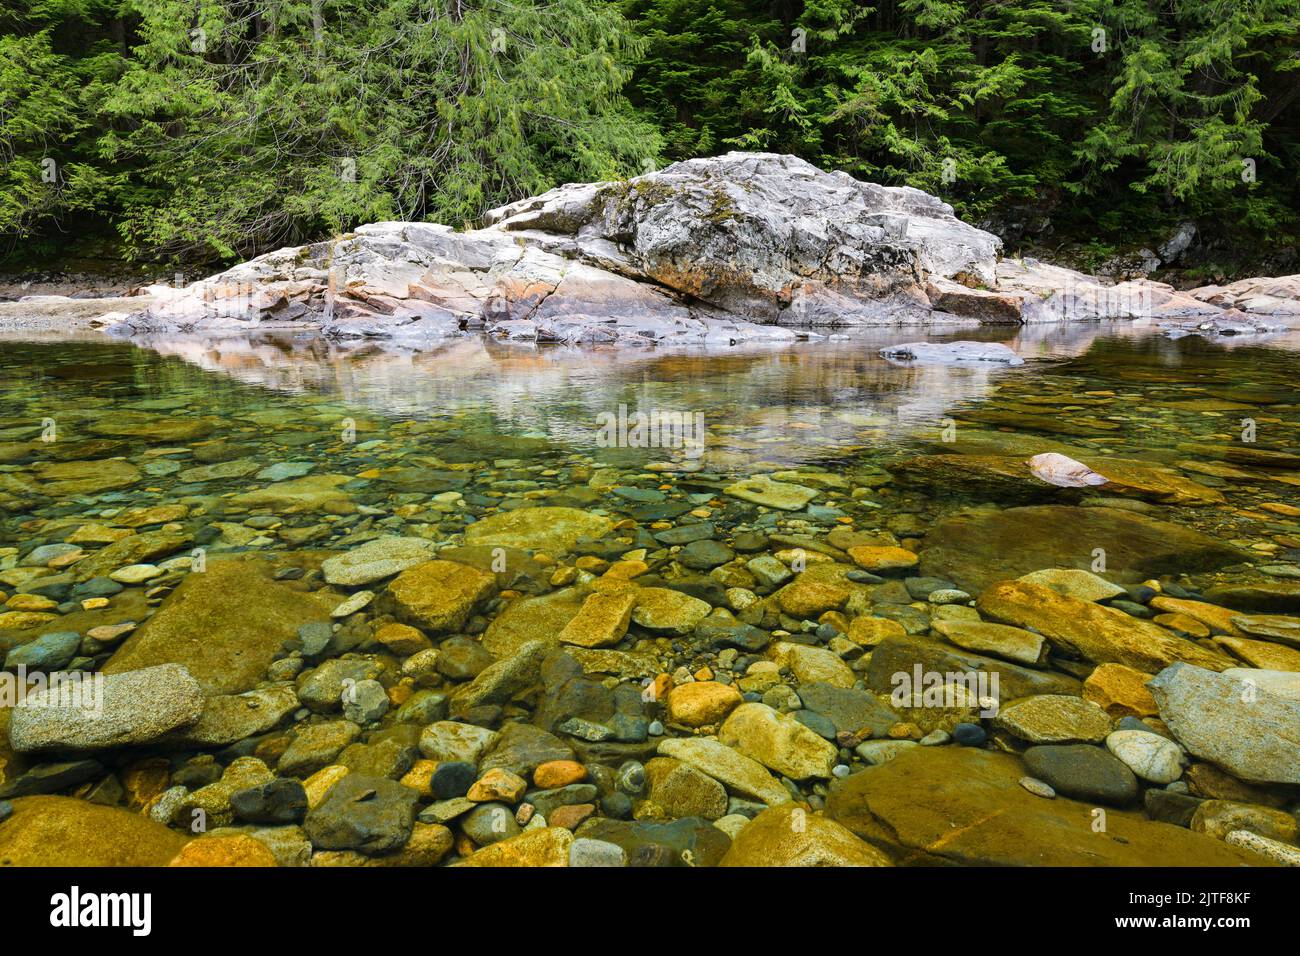 Clear water with rocks visible on riverbed in the forest with colorful rock in summer Stock Photo